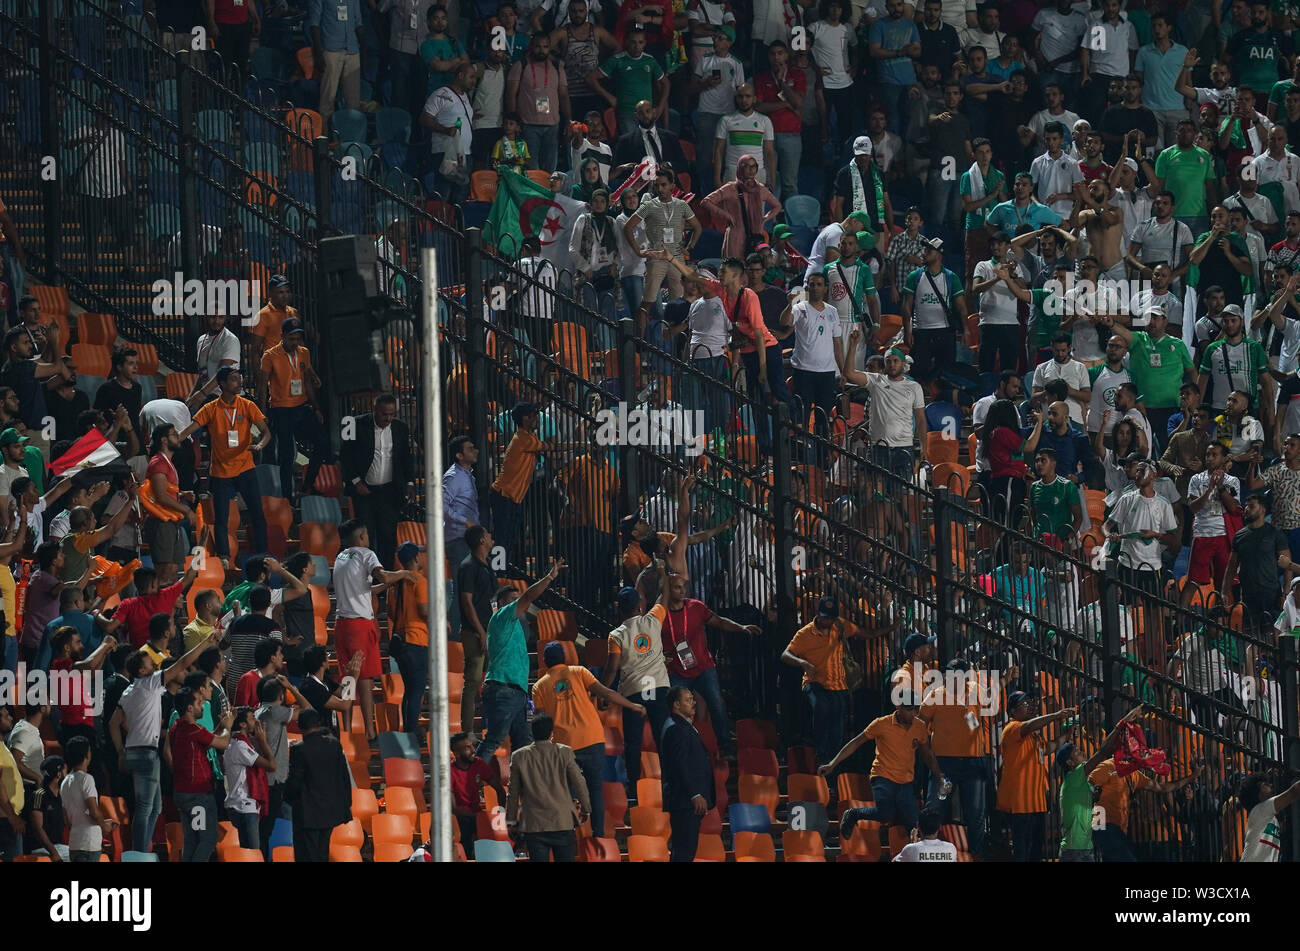 Cairo, Algeria, Egypt. 14th July, 2019. FRANCE OUT July 14, 2019: Crowd trouble during the 2019 African Cup of Nations match between Algeria and Nigeria at the Cairo International Stadium in Cairo, Egypt. Ulrik Pedersen/CSM/Alamy Live News Stock Photo